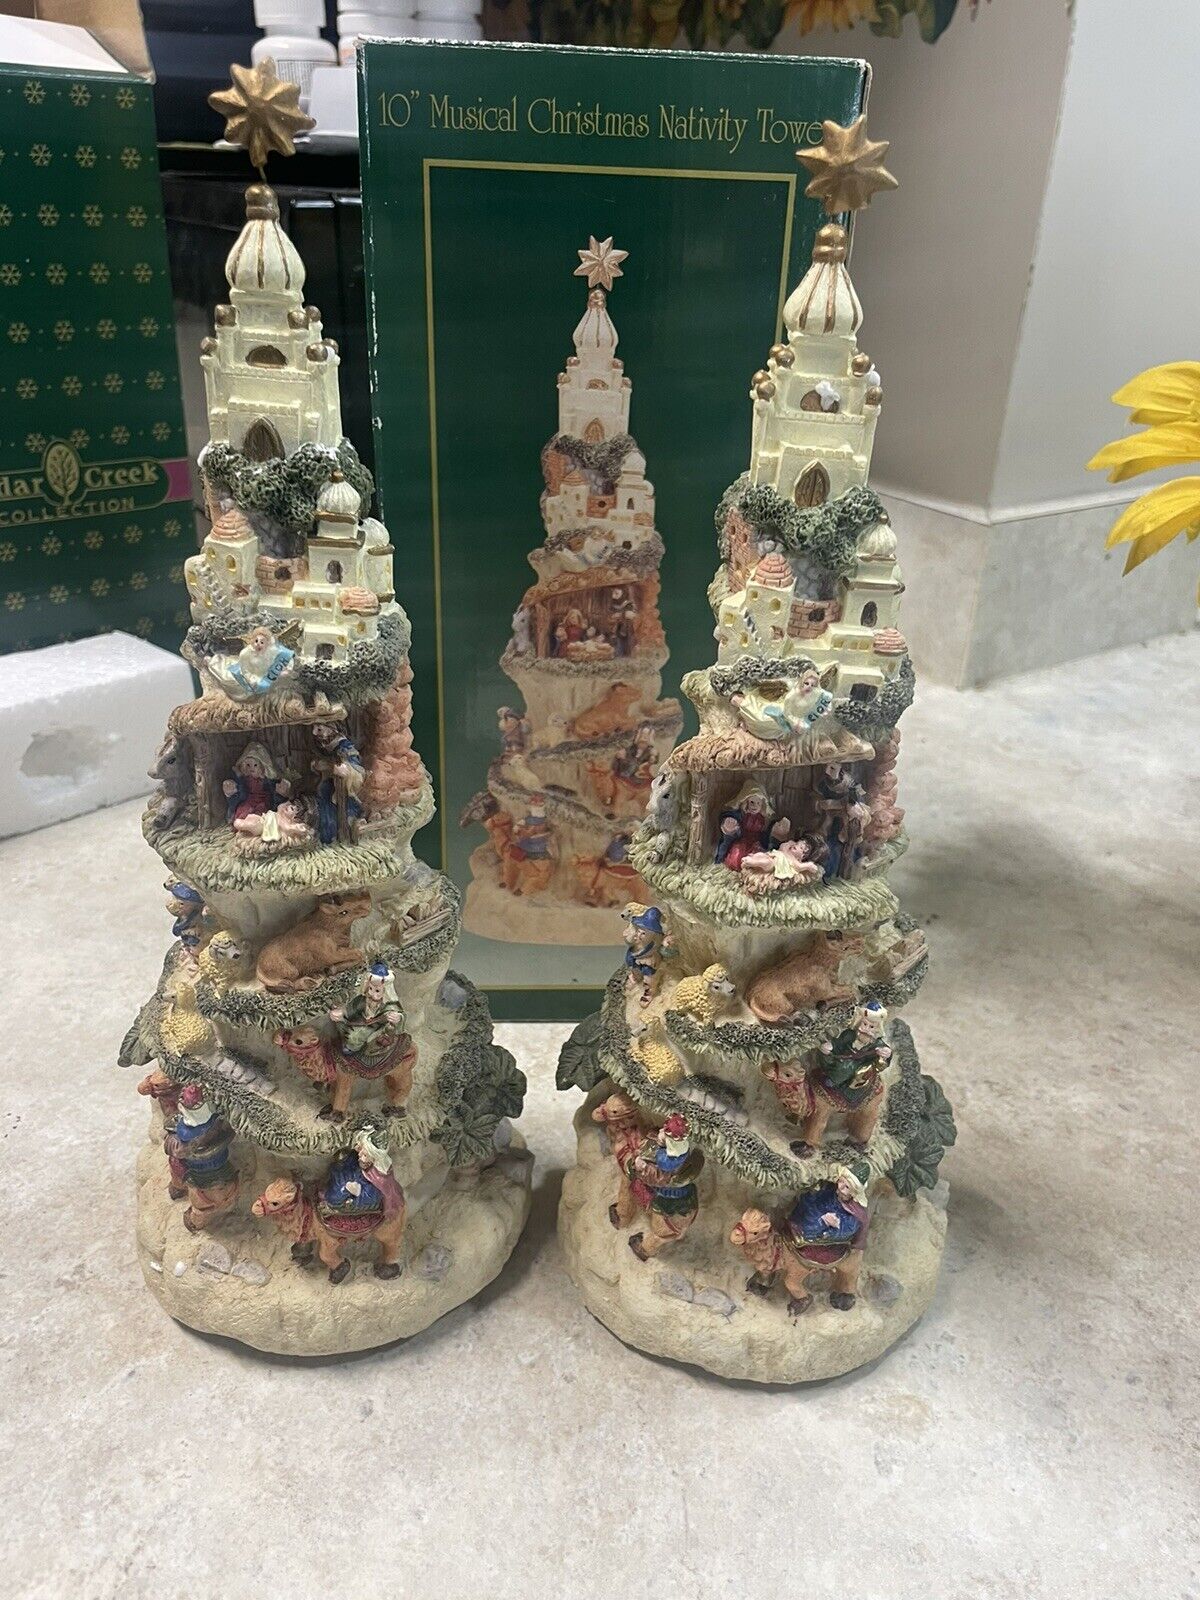 Nativity Tower Vintage  Ceder Creek Collection Musical Christmas